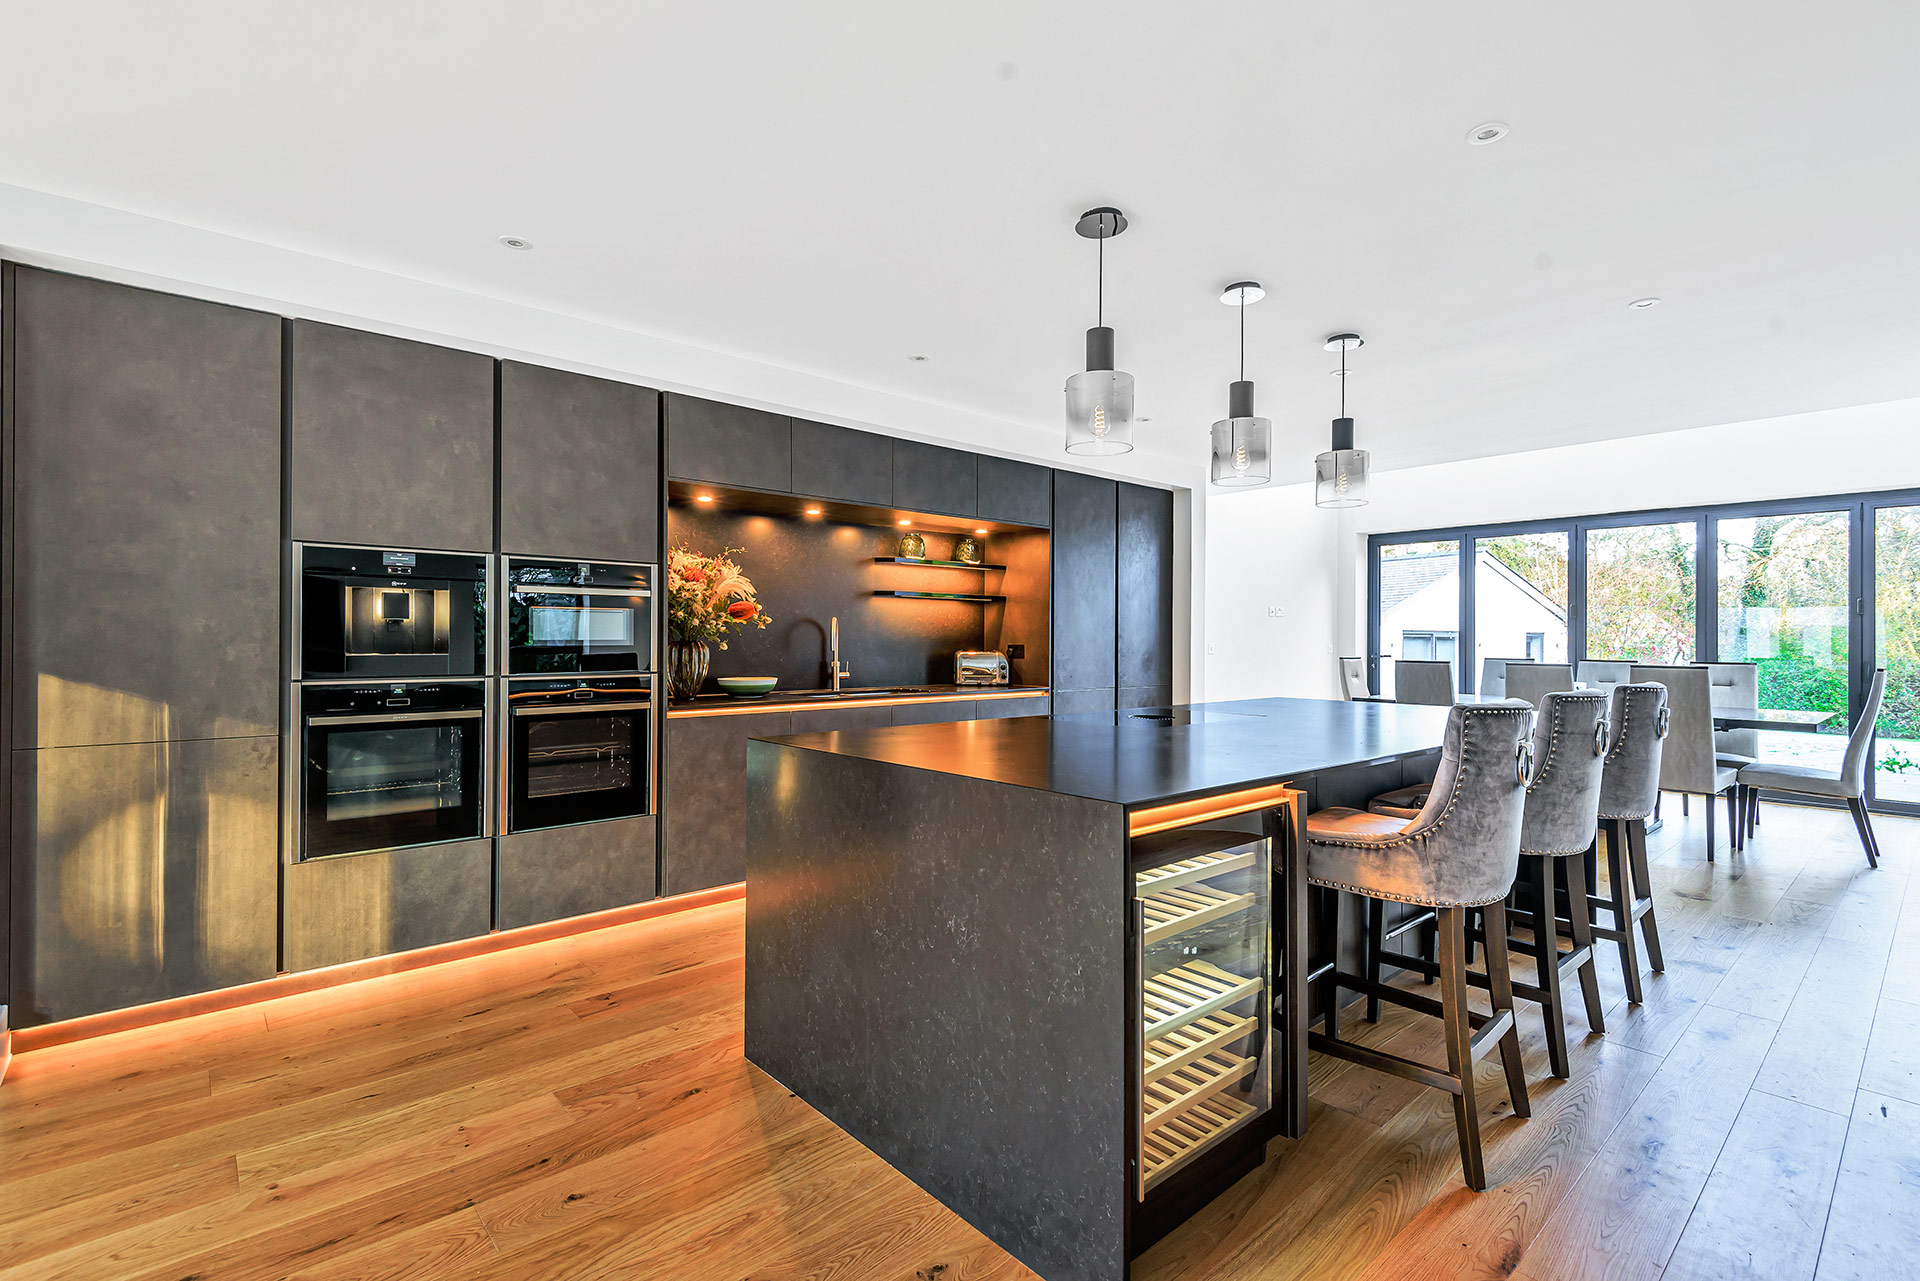 modern internal kitchen dining area with feature lighting on cupboards and kitchen islands